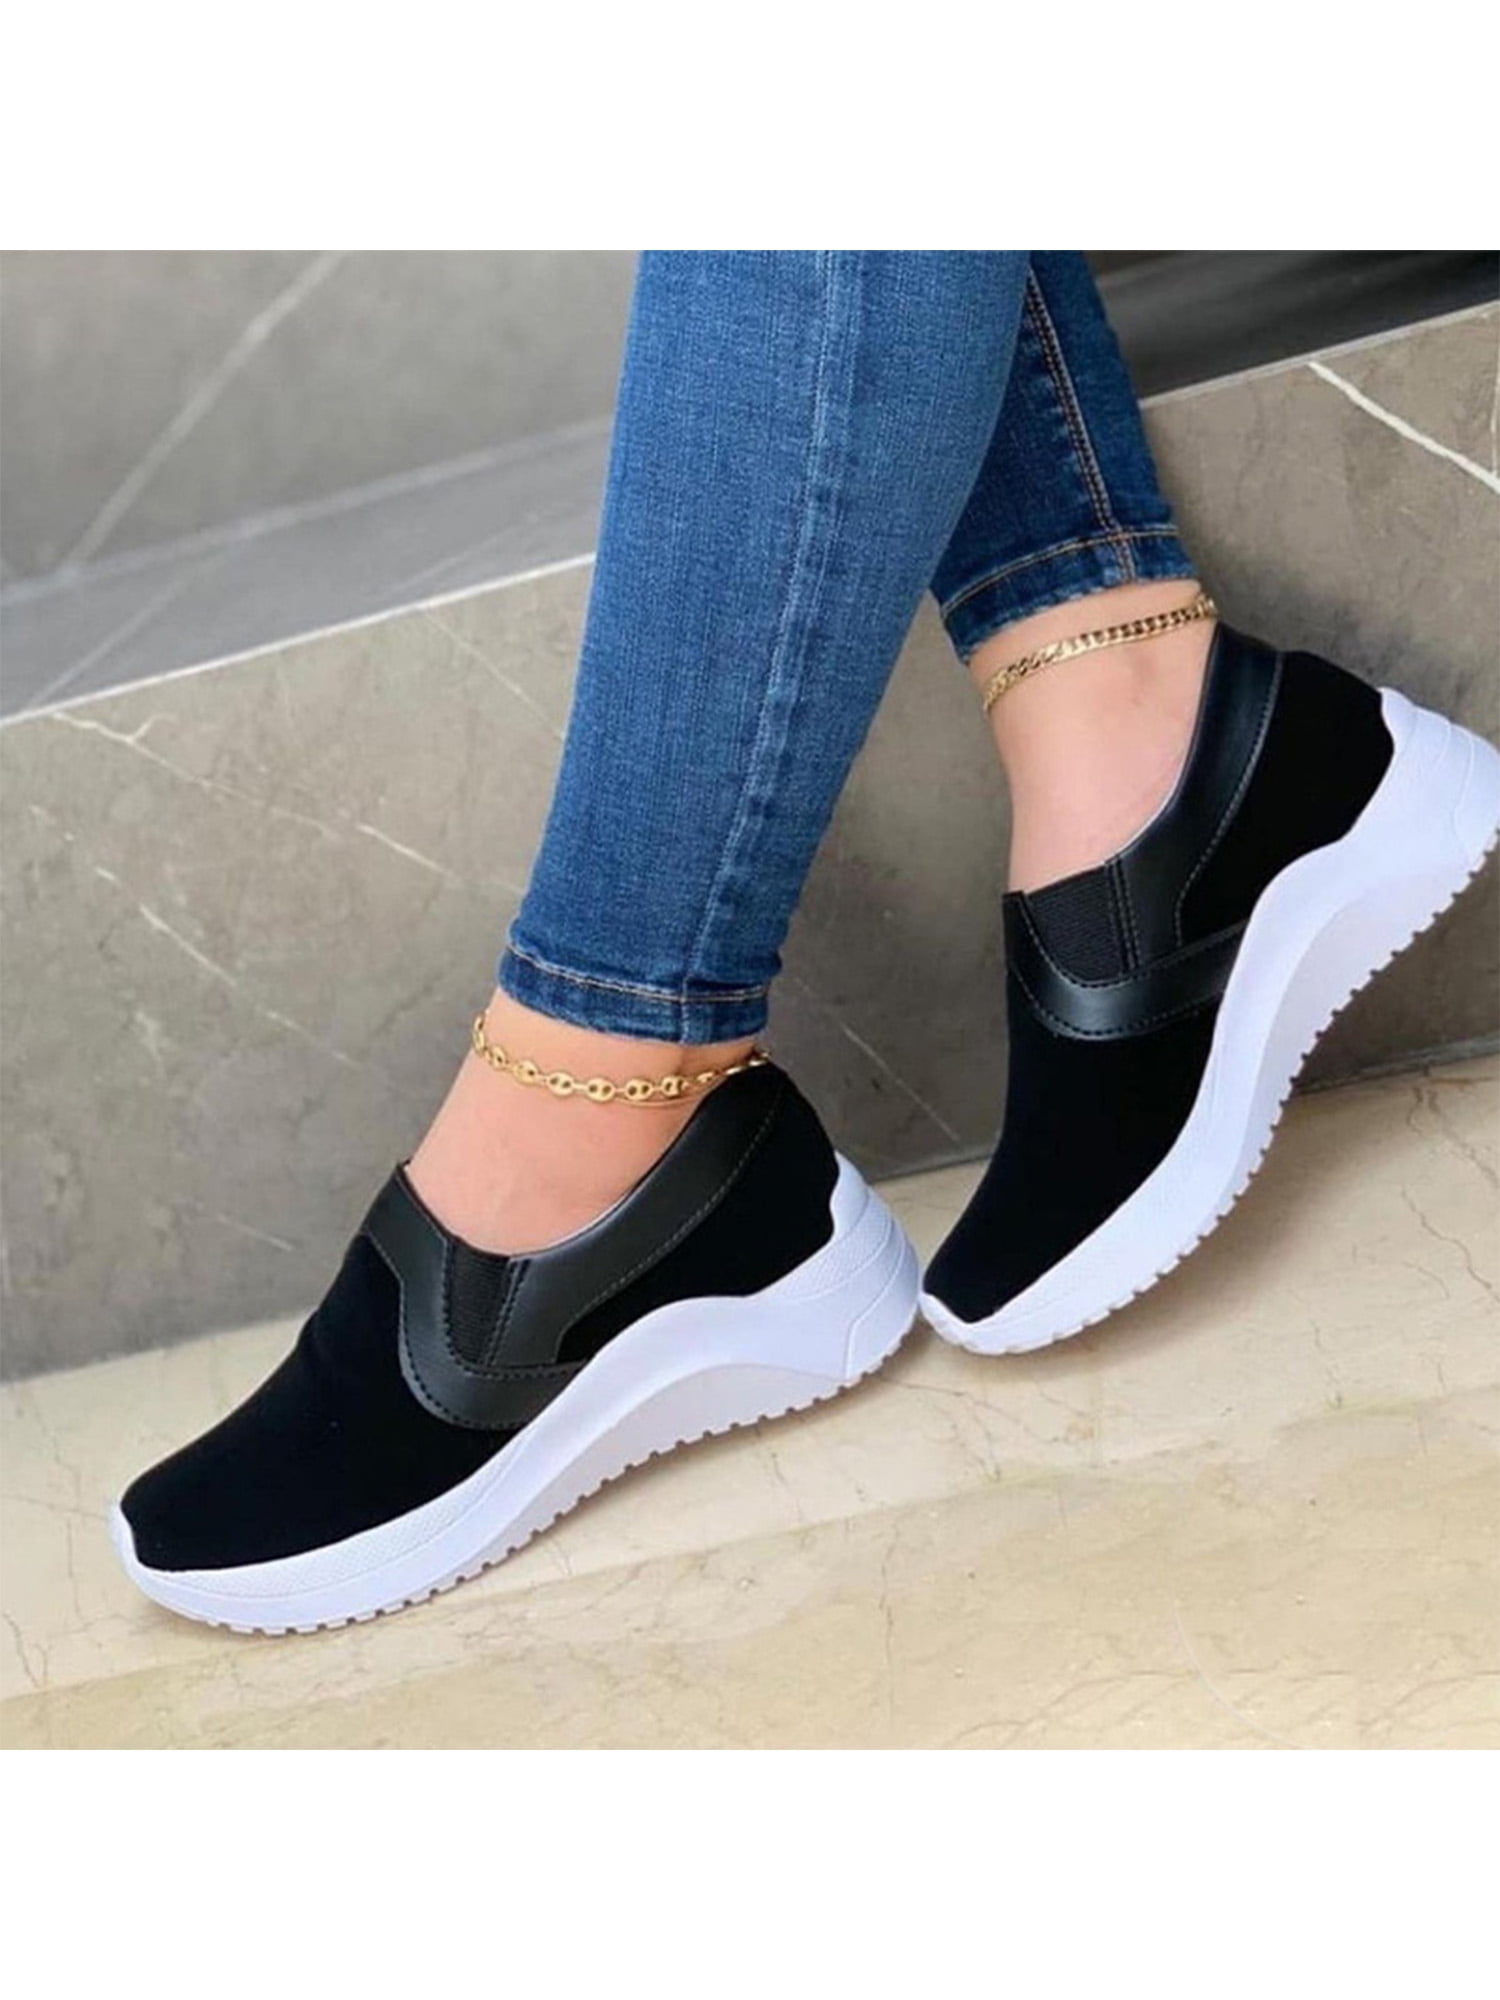 Women Platform Sneakers Slip On Trainers Comfy Plaid Loafers Walking Sport Shoes 